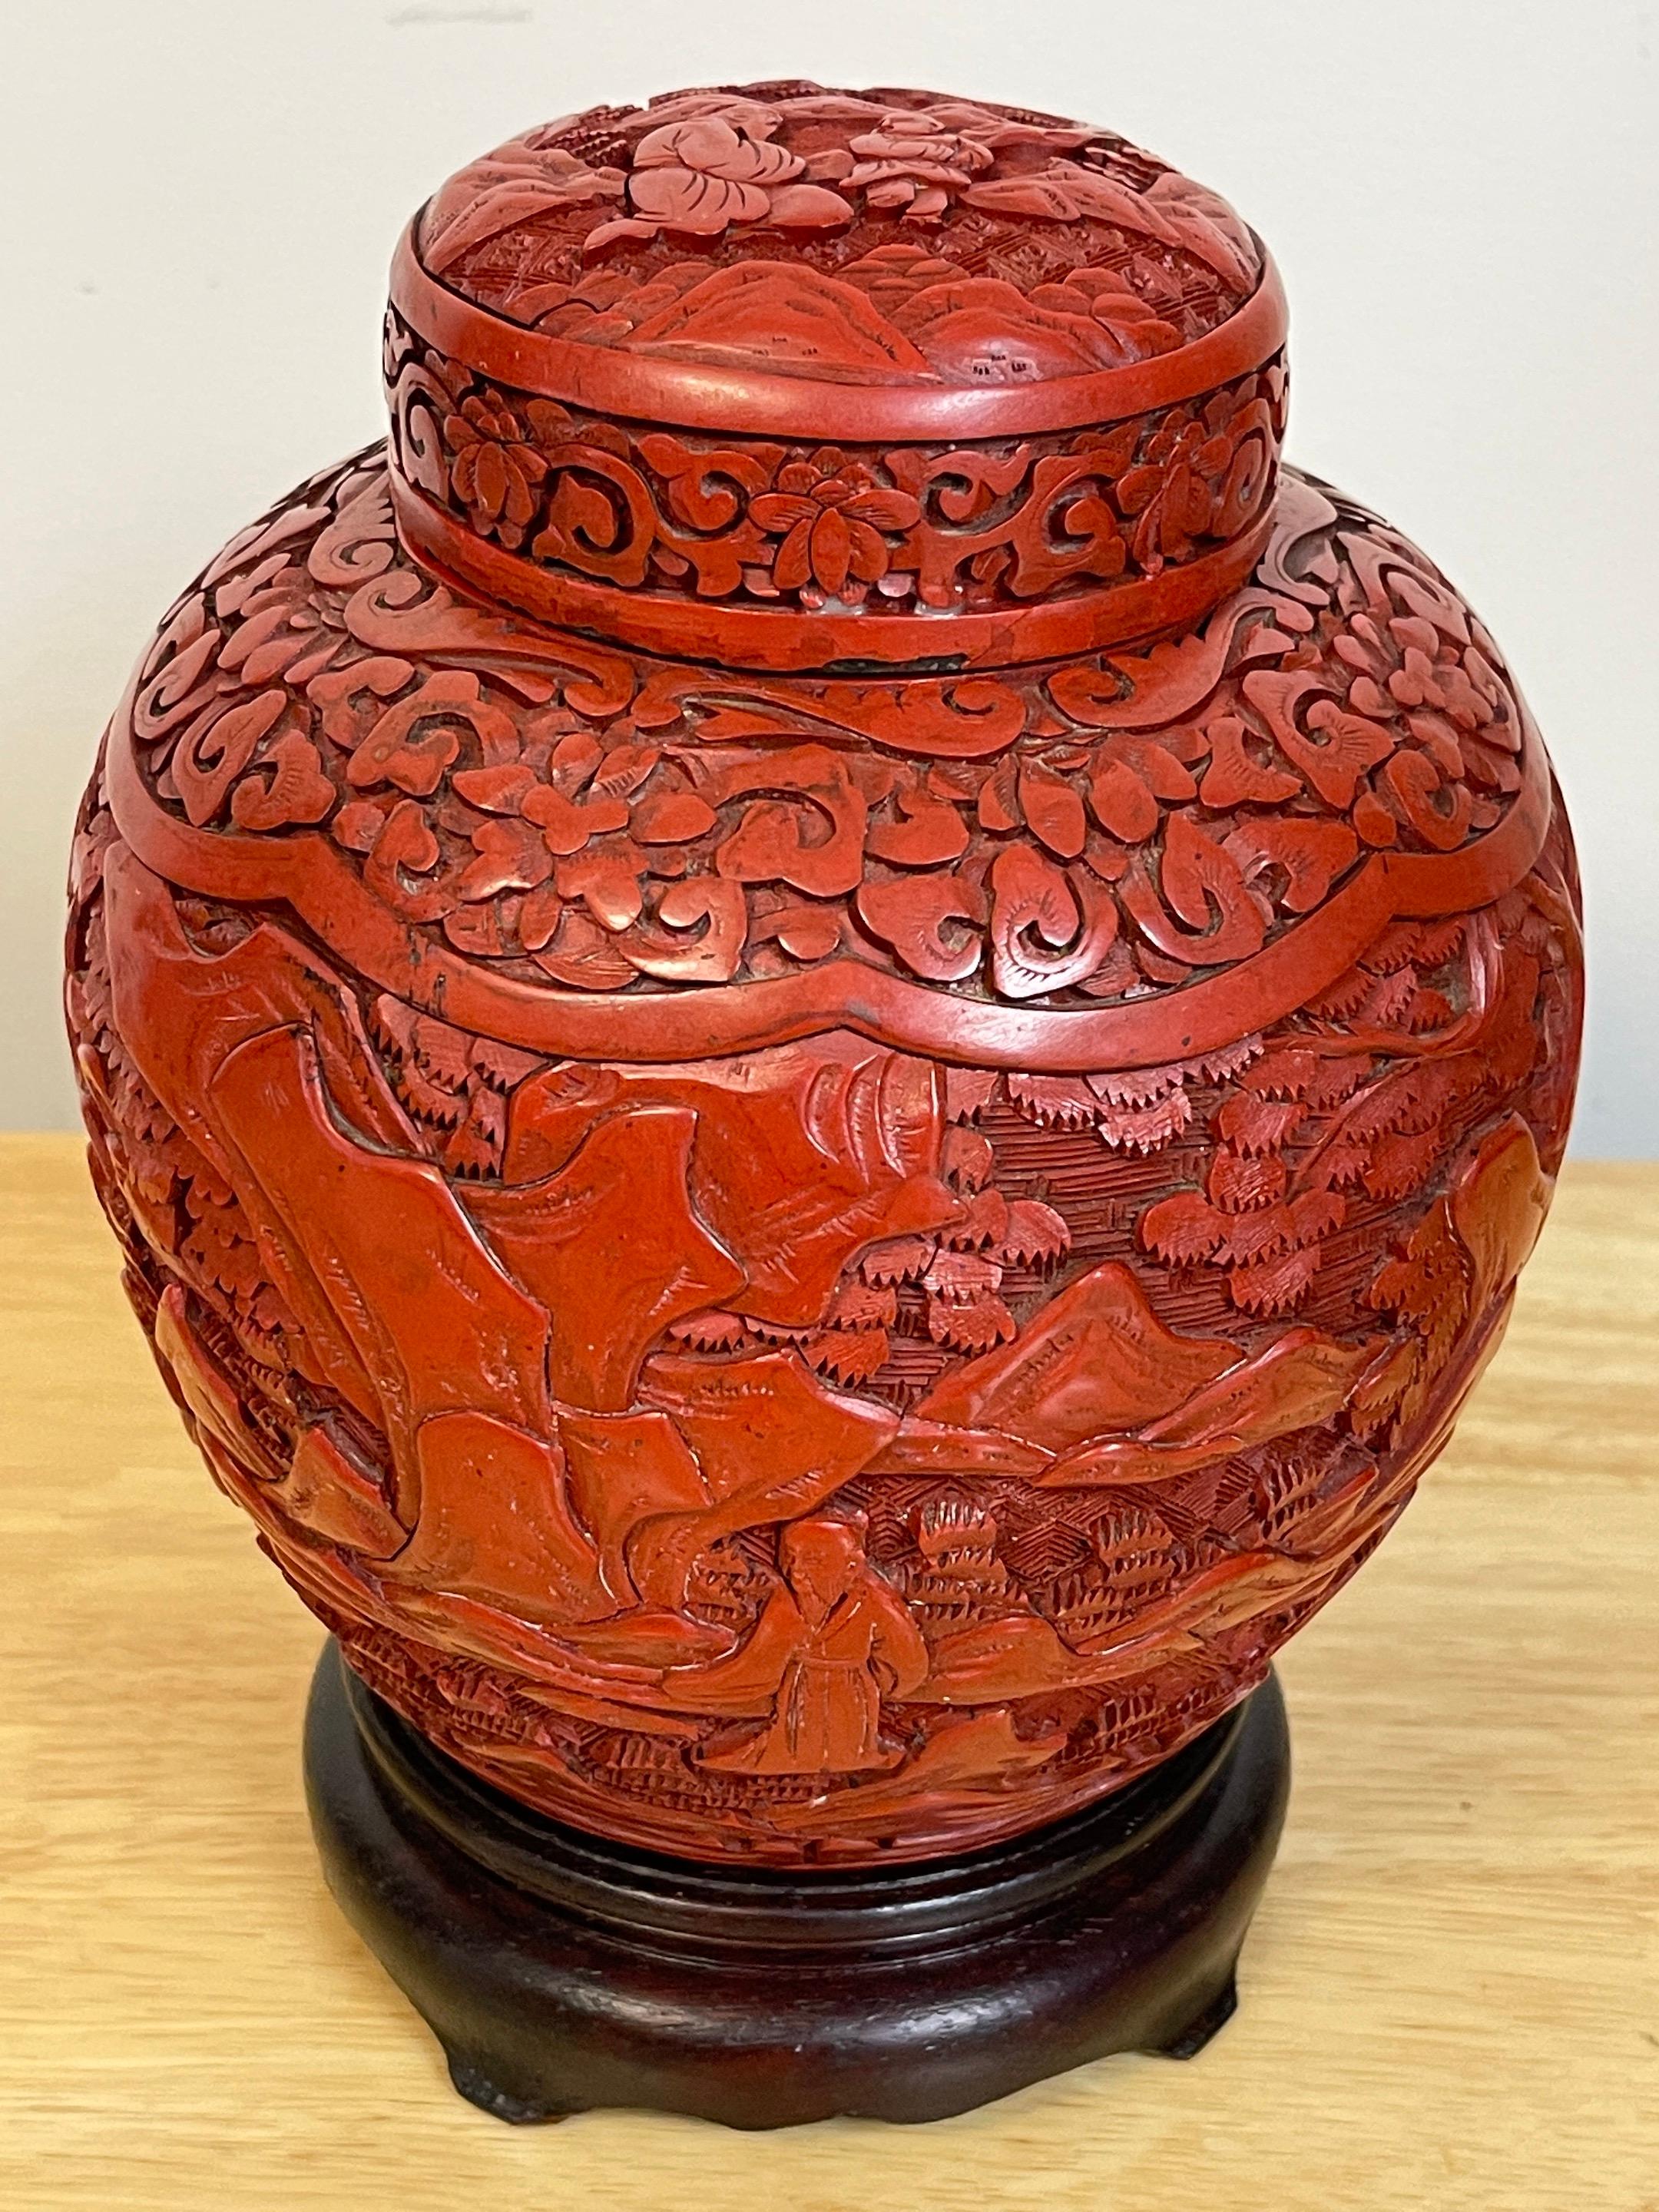 Post Qing Dynasty Cinnabar ginger jar & stand 
Exquisite high relief carved continuous landscape motif, complete with hardwood stand. Unmarked.
The ginger jar alone measures 7-inches high x 6-inches diameter x 3.5-inch diameter base 
On the stand